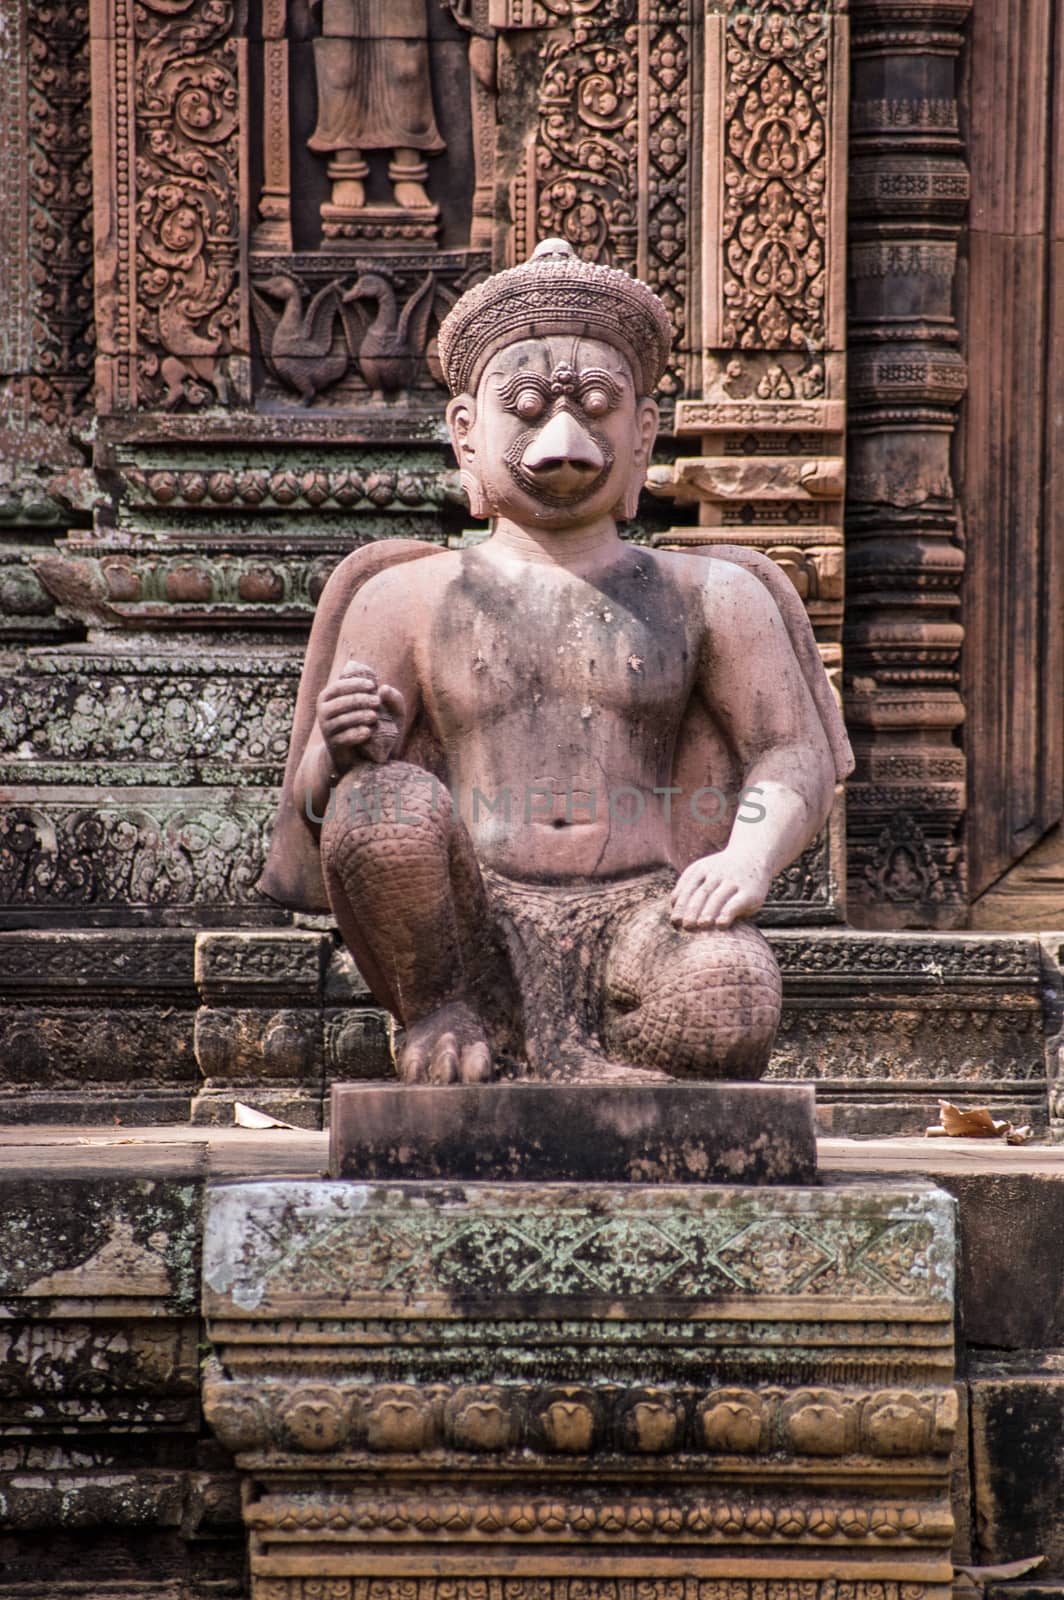 Ancient Khmer statue of a bird faced deity guarding one of the Prasat chapels at the temple of Banteay Srei, Angkor, Cambodia.